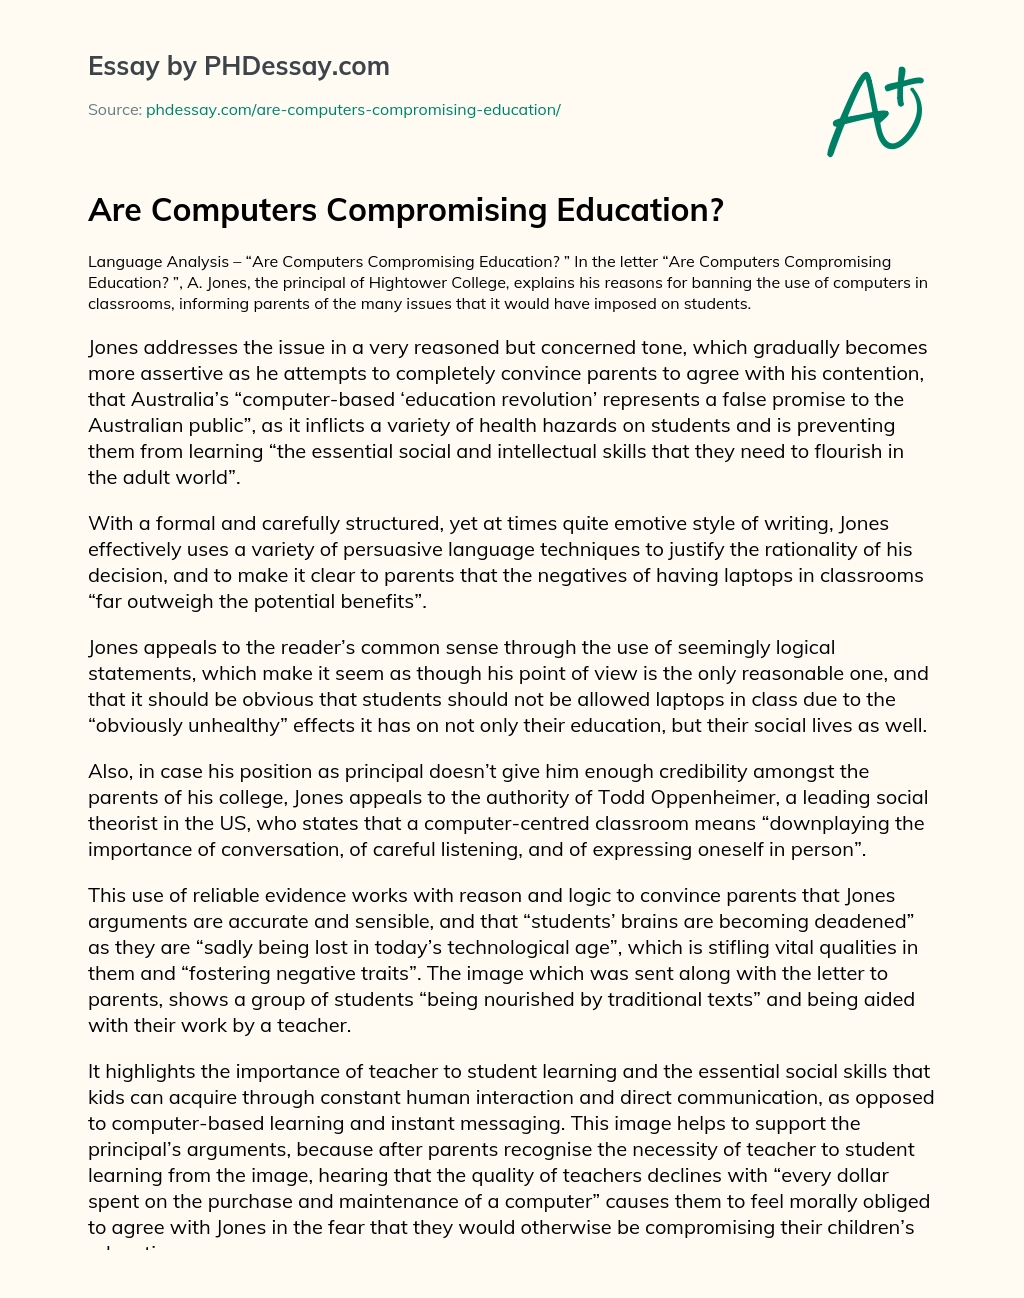 Are Computers Compromising Education? essay